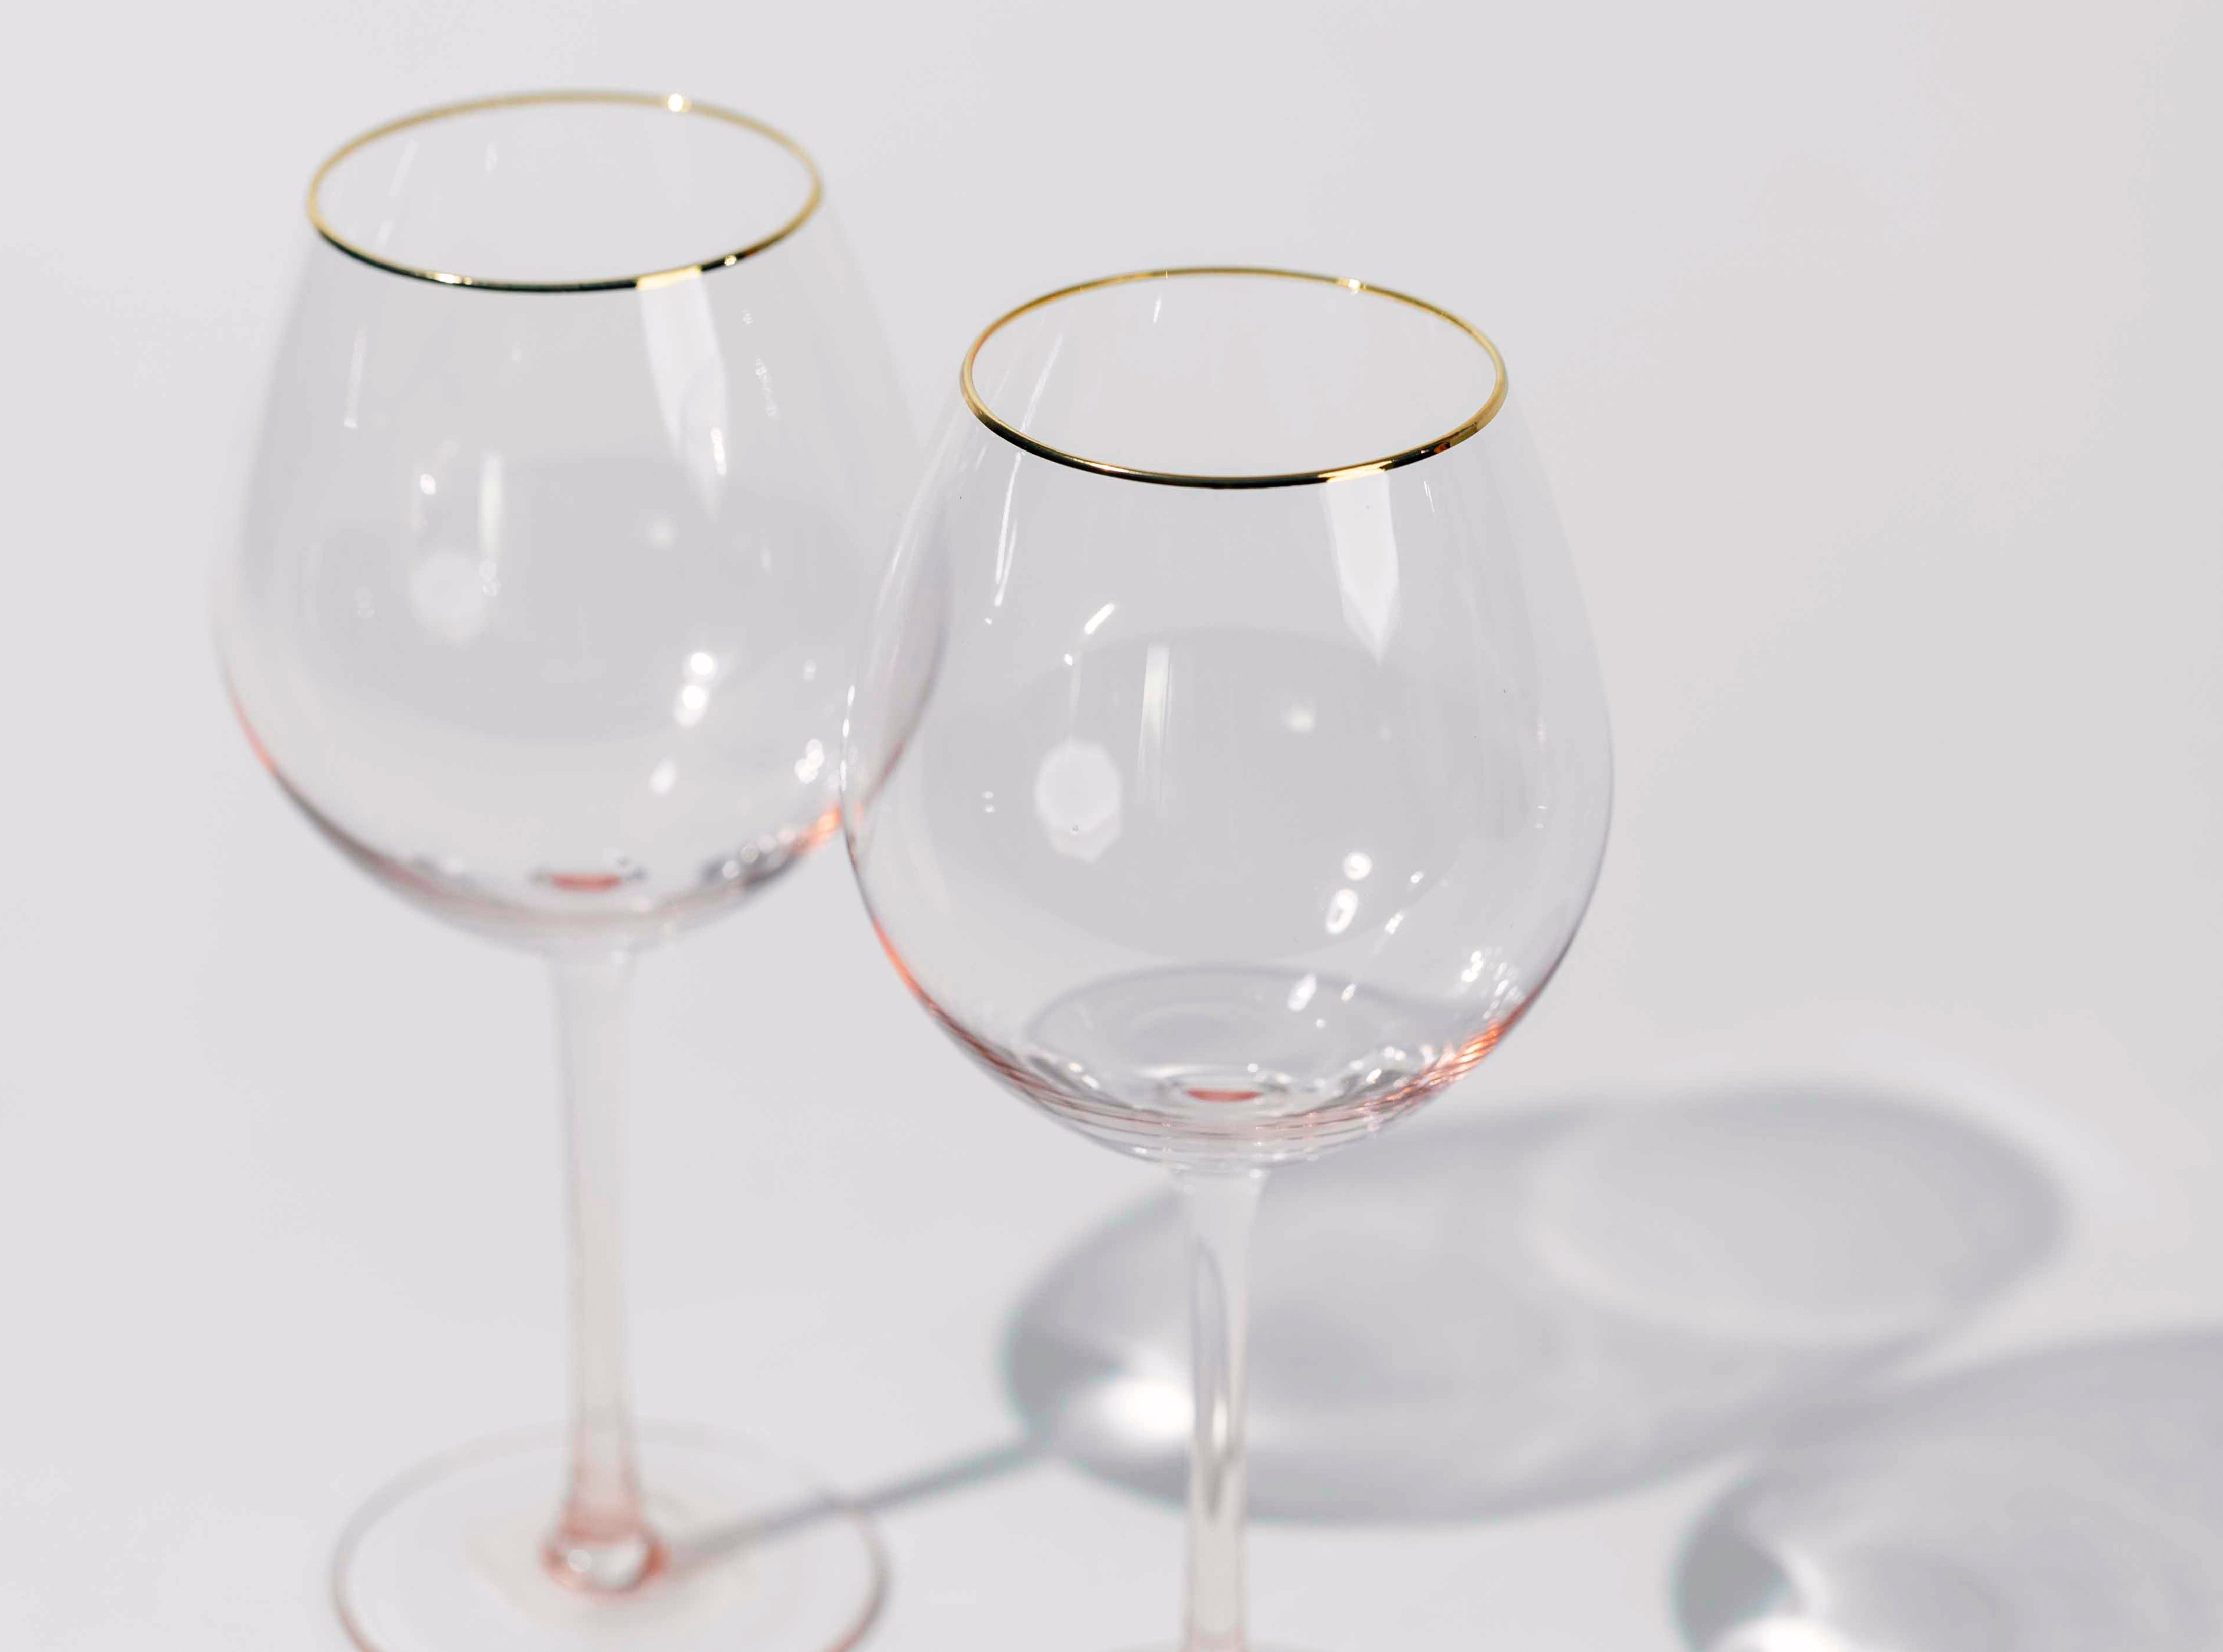 Wine Glass (Set of 2), Blush Pink – Only on The Avenue